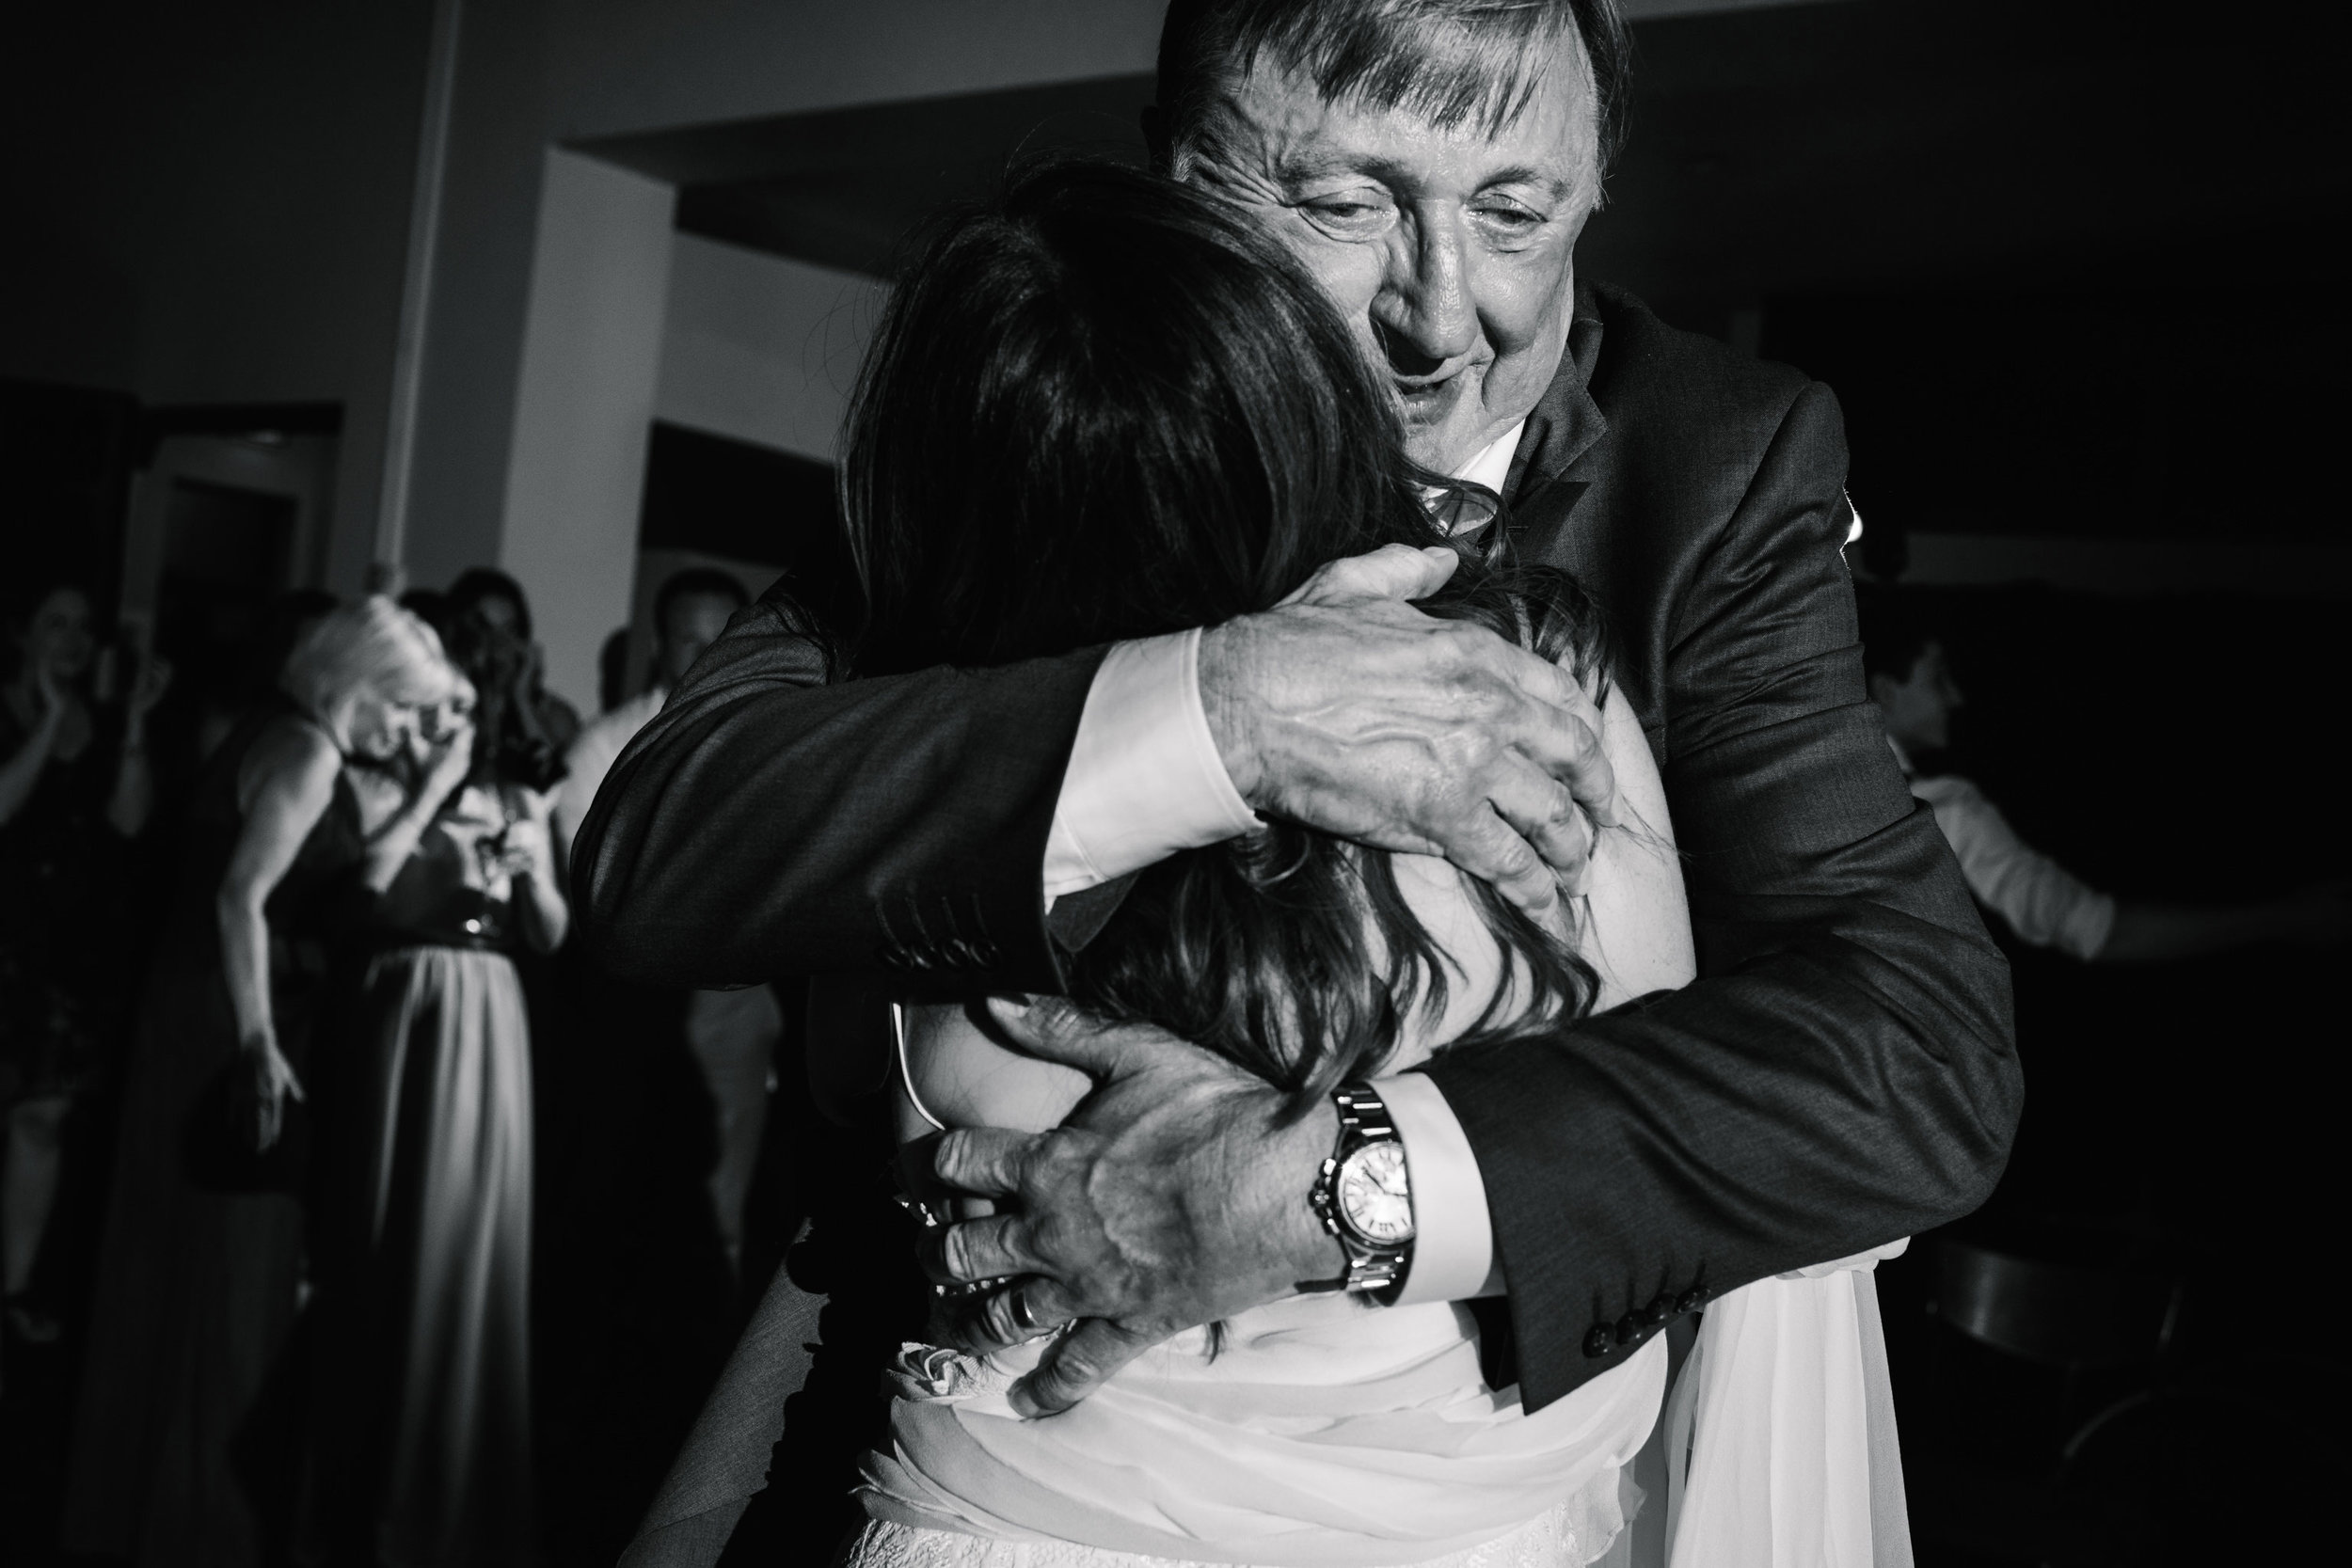 Father hugging daughter and looking emotional during dance